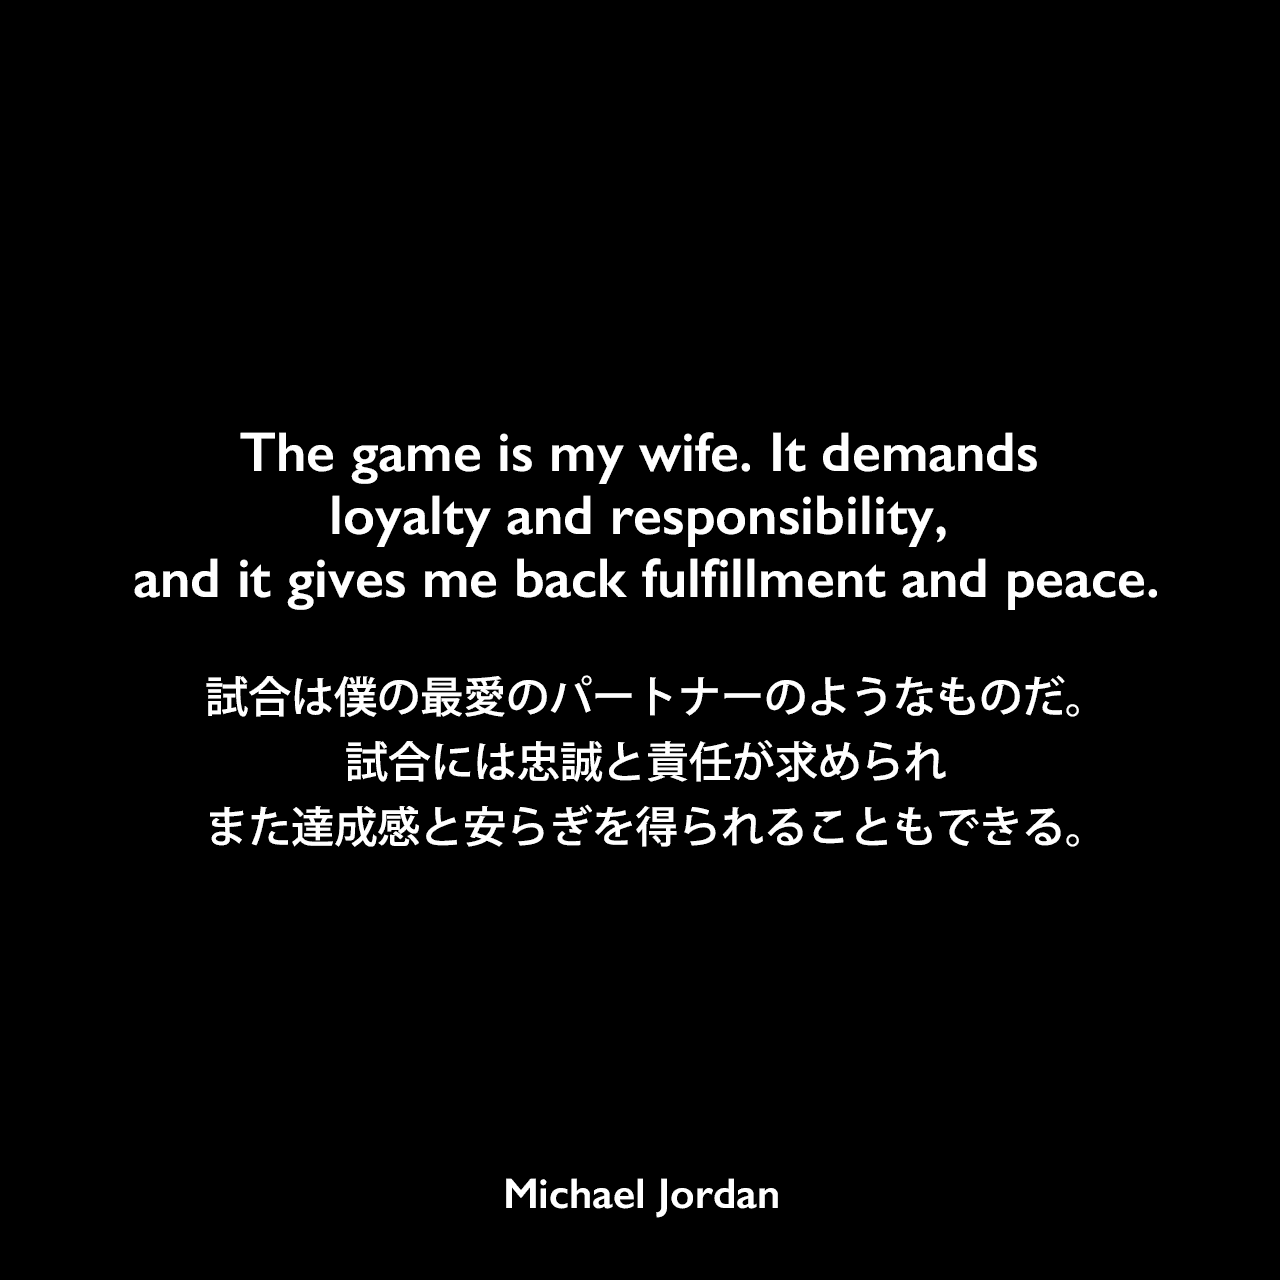 The game is my wife. It demands loyalty and responsibility, and it gives me back fulfillment and peace.試合は僕の最愛のパートナーのようなものだ。試合には忠誠と責任が求められ、また達成感と安らぎを得られることもできる。Michael Jordan